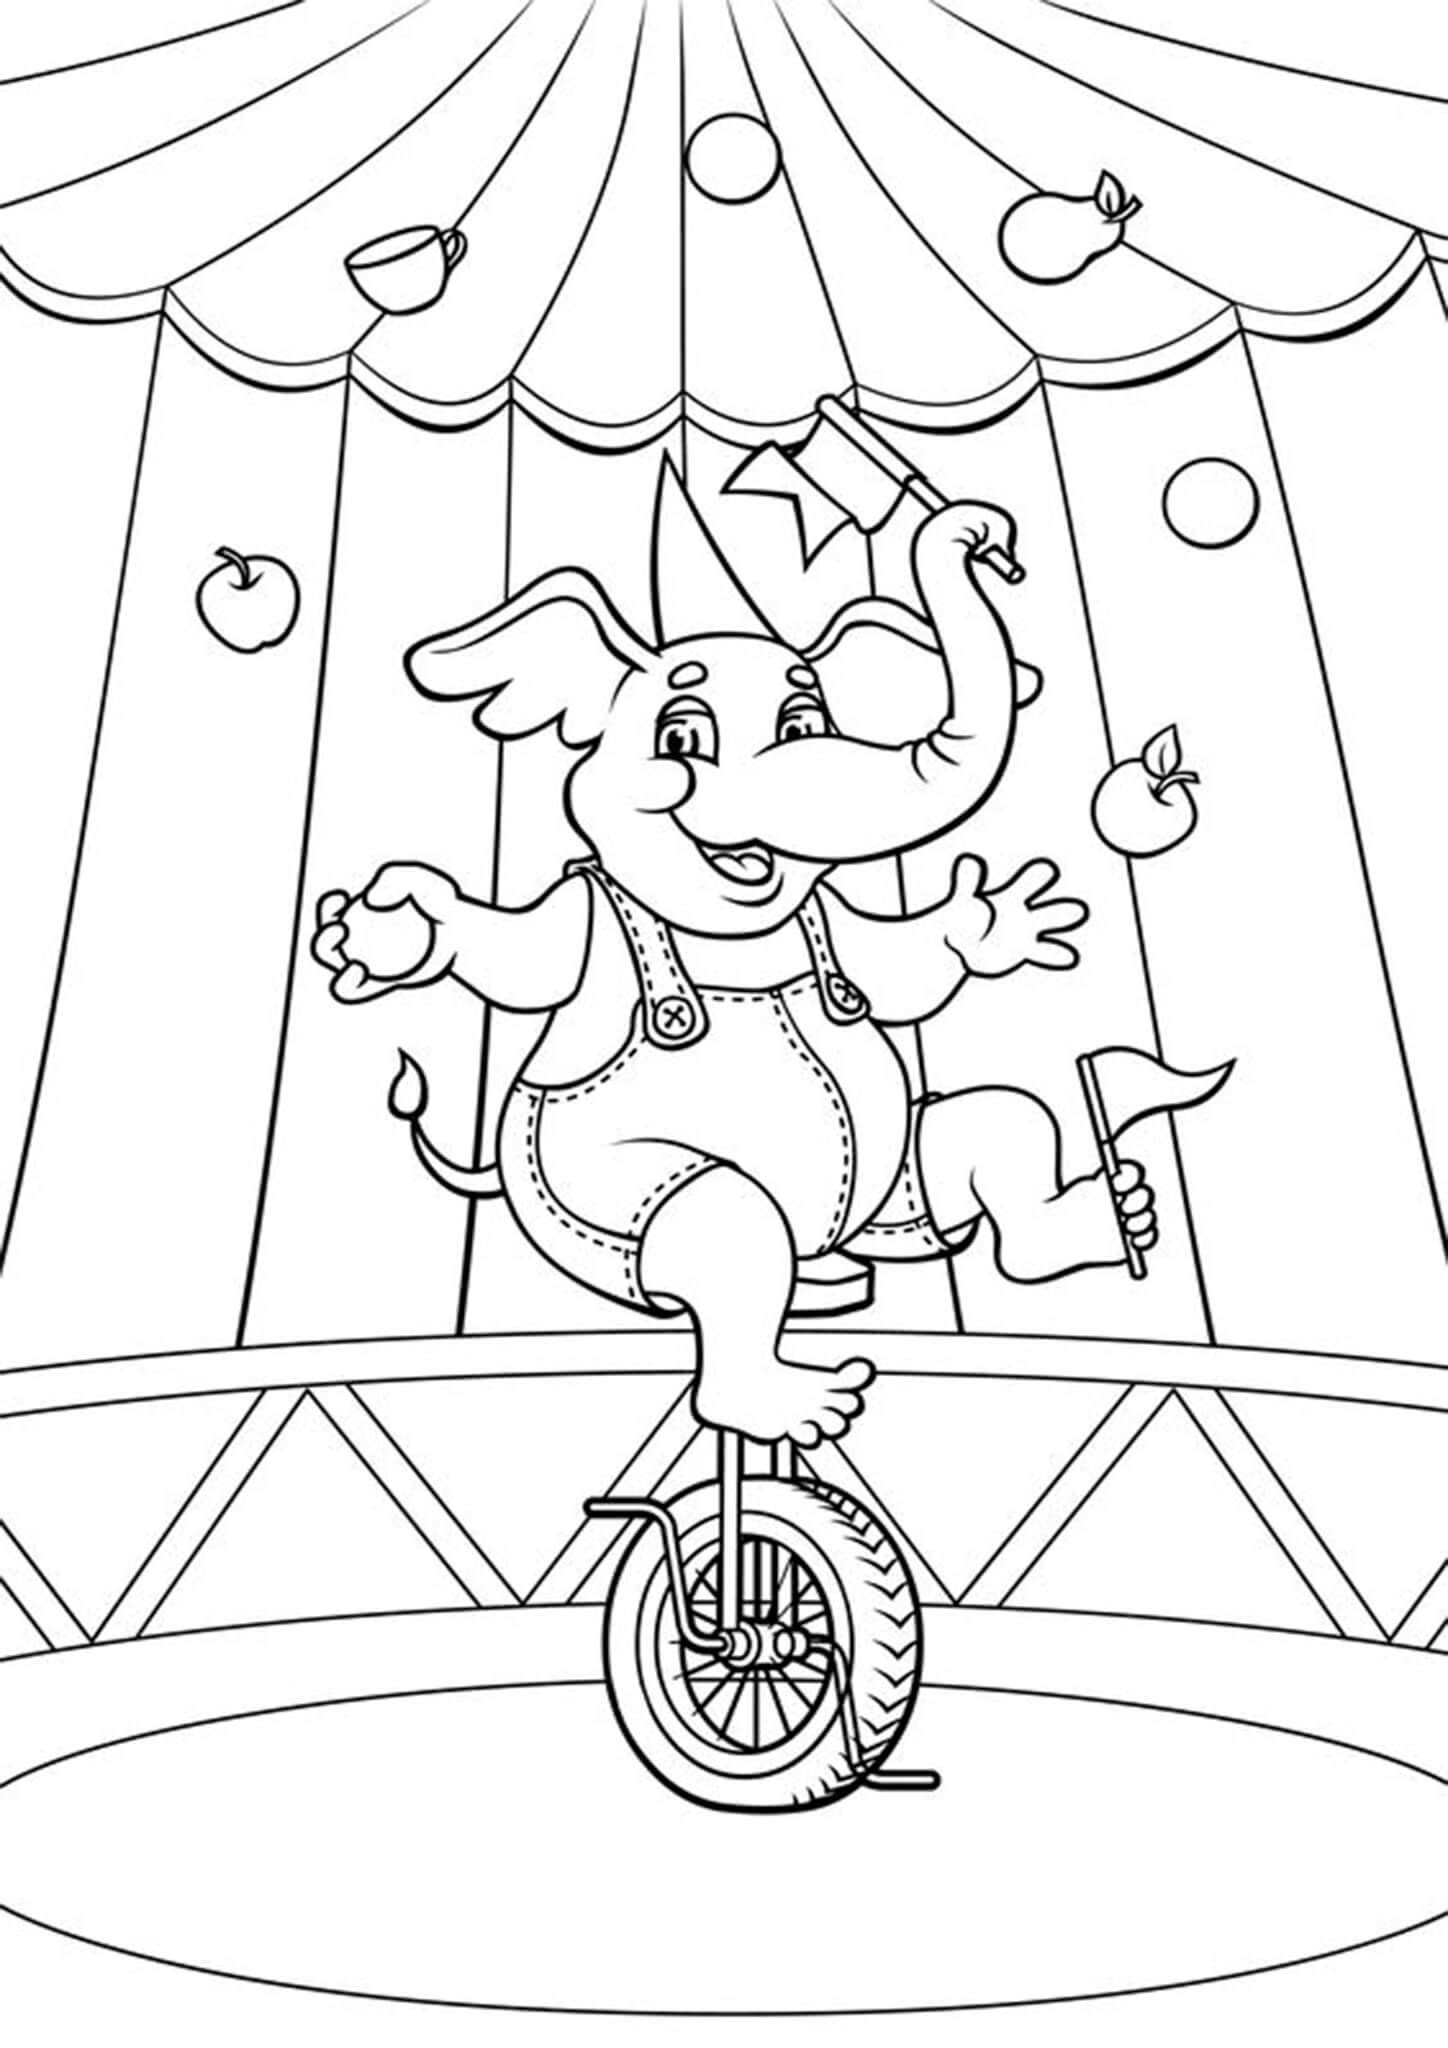 Free easy to print circus coloring pages coloring books animal coloring pages elephant coloring page